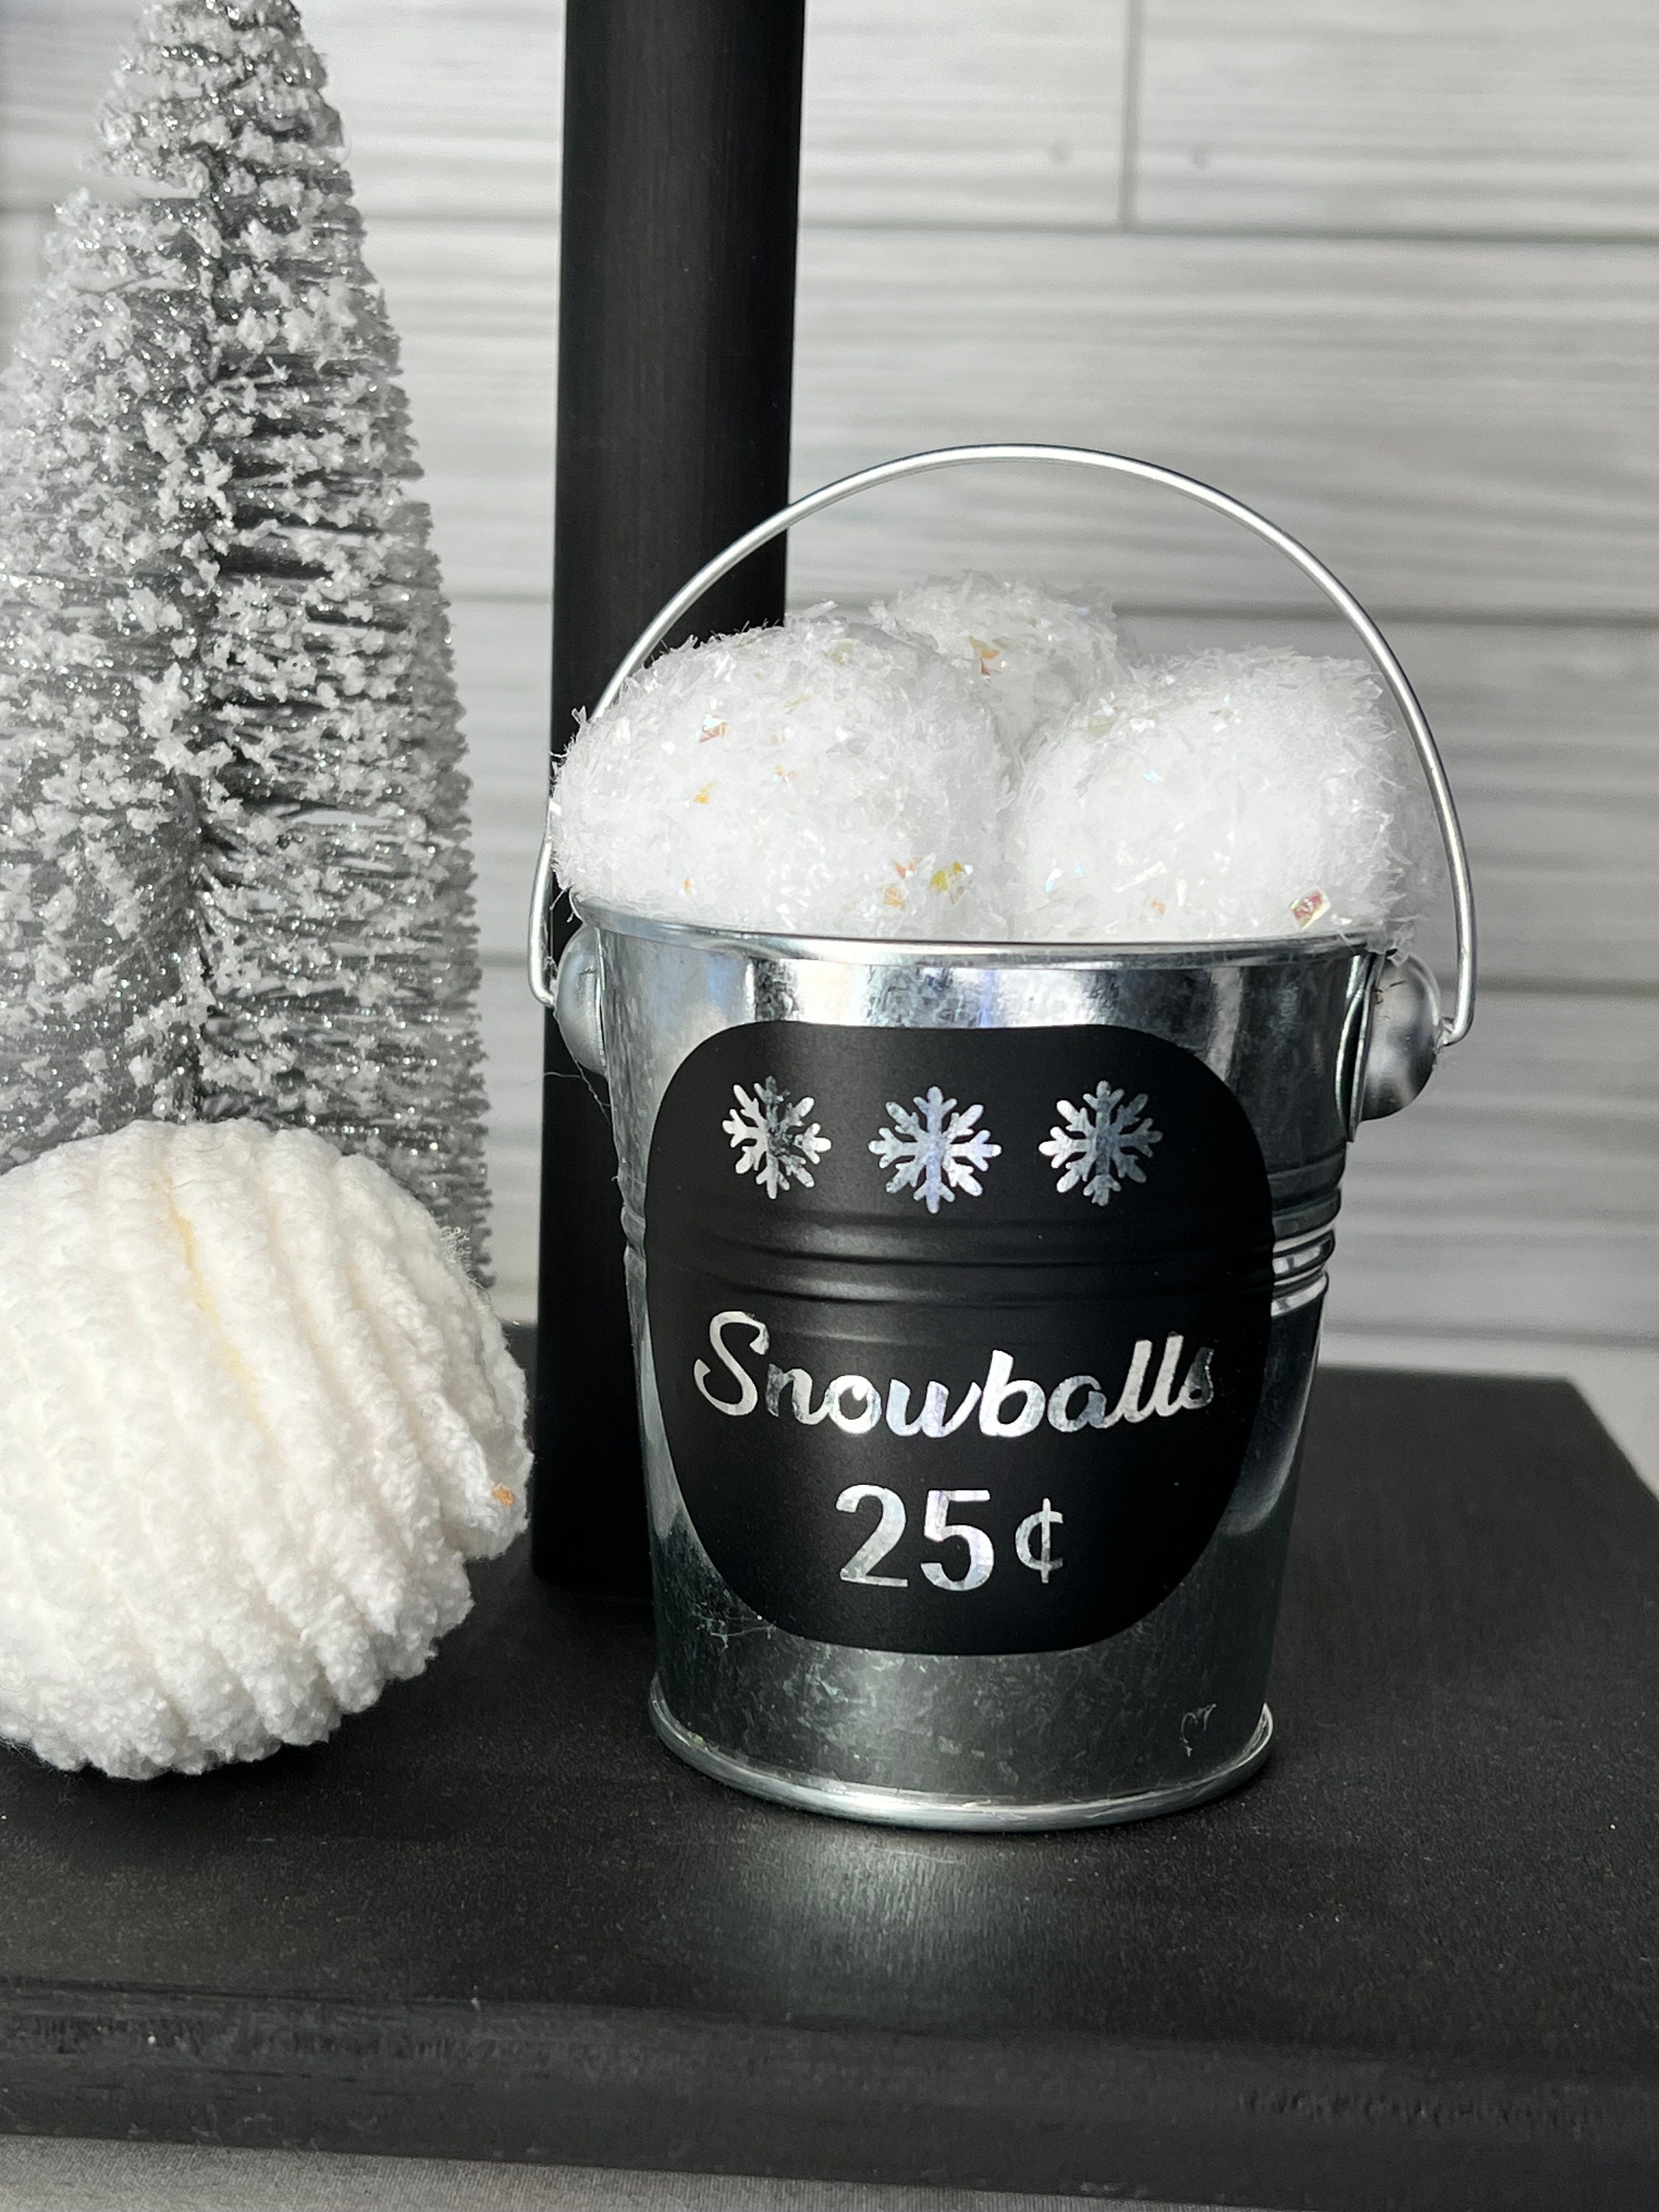 DIY Indoor Snowball Fight Buckets for Kids - FREE SVG & PRINTABLE